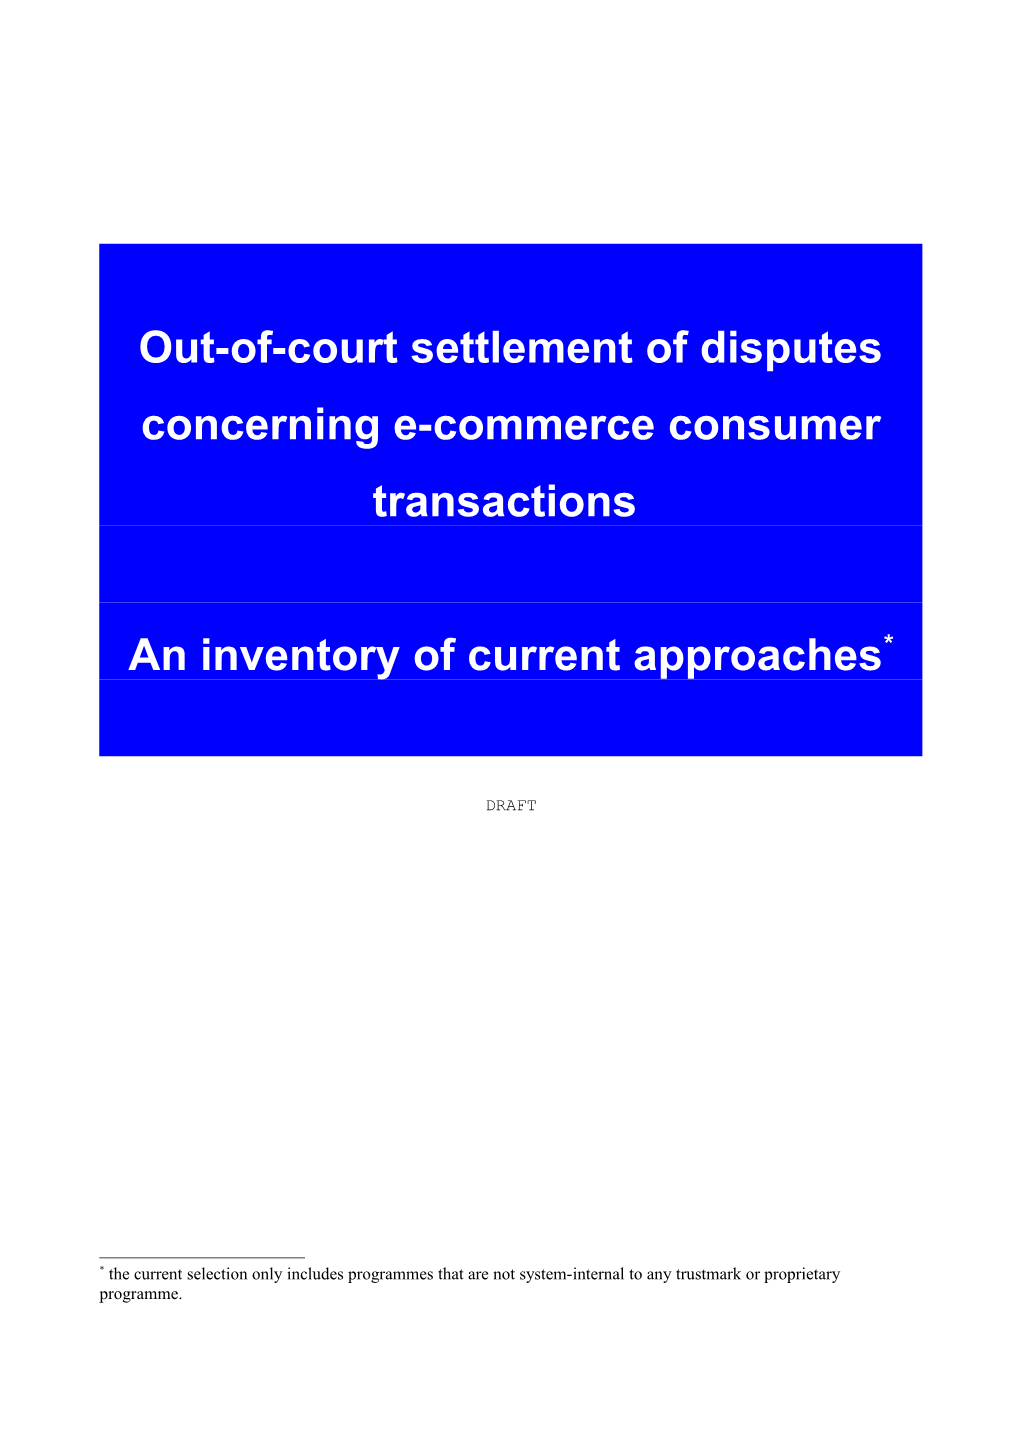 Out-Of-Court Settlement of Disputes Concerning E-Commerce Consumer Transactions